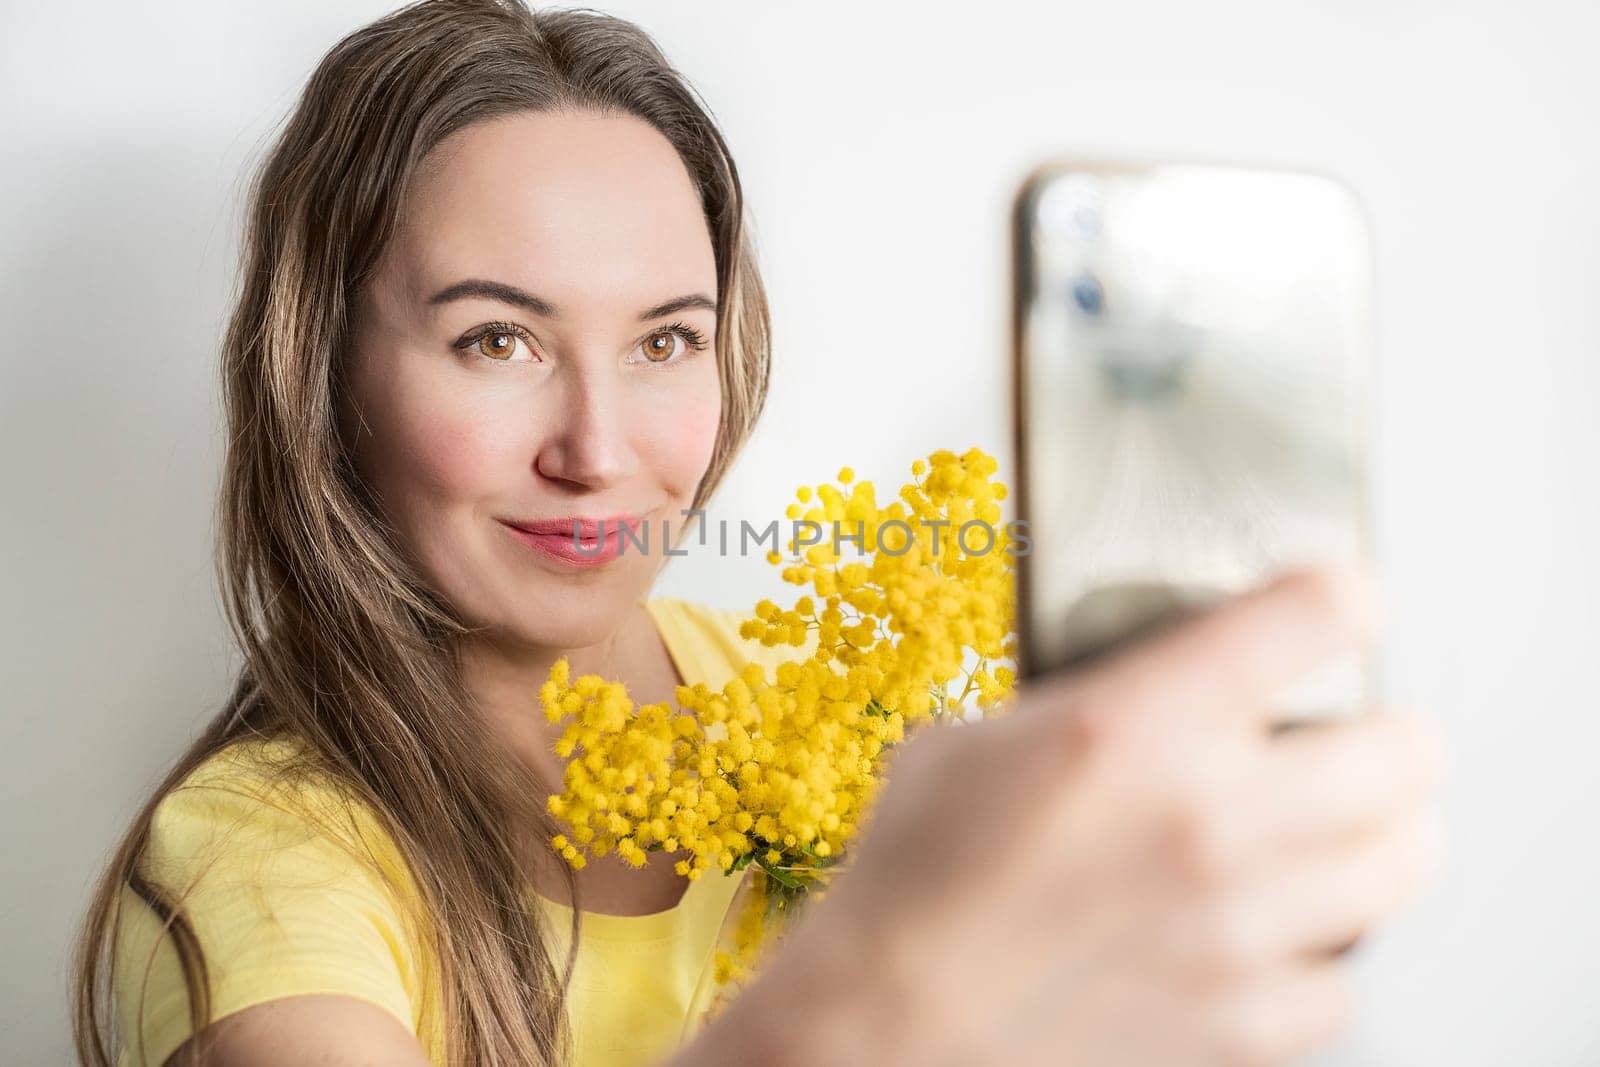 Beautiful young woman with mimosa flowers taking a selfie on white background.